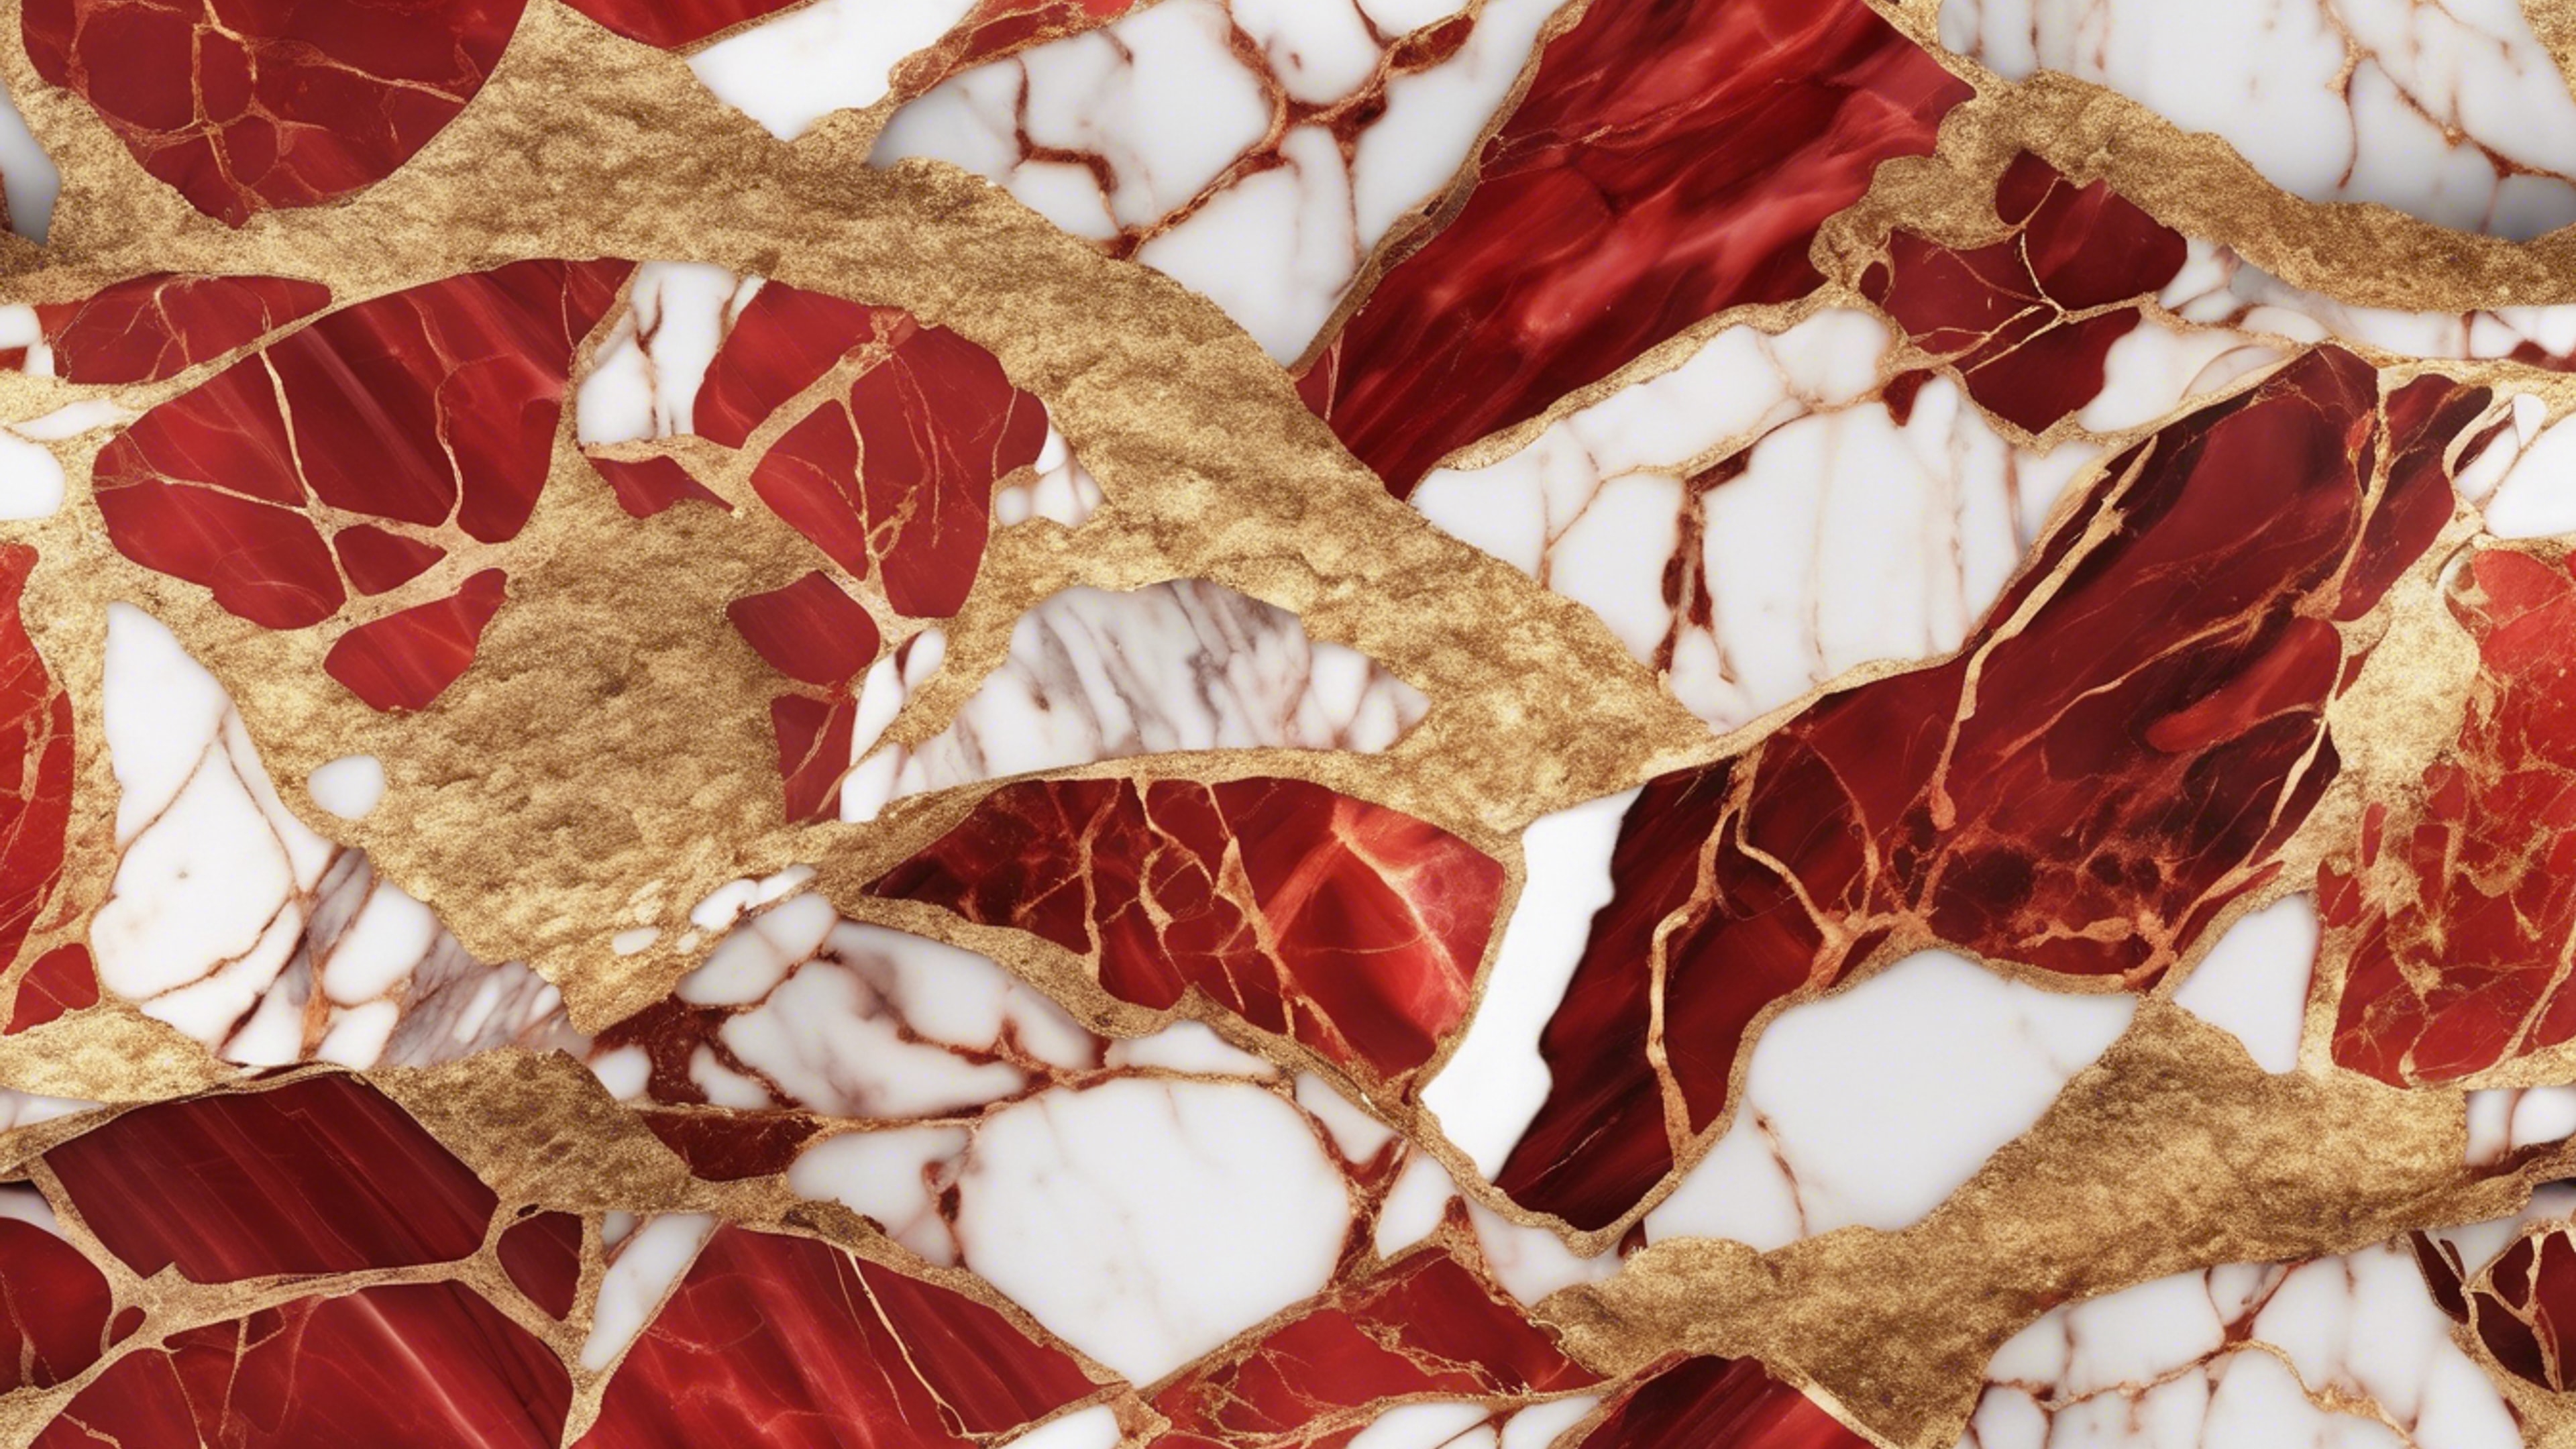 Seamless pattern of red and gold marble set that reflects an elegant aesthetic. Tapeta na zeď[f027cacdf9b04c65aa51]